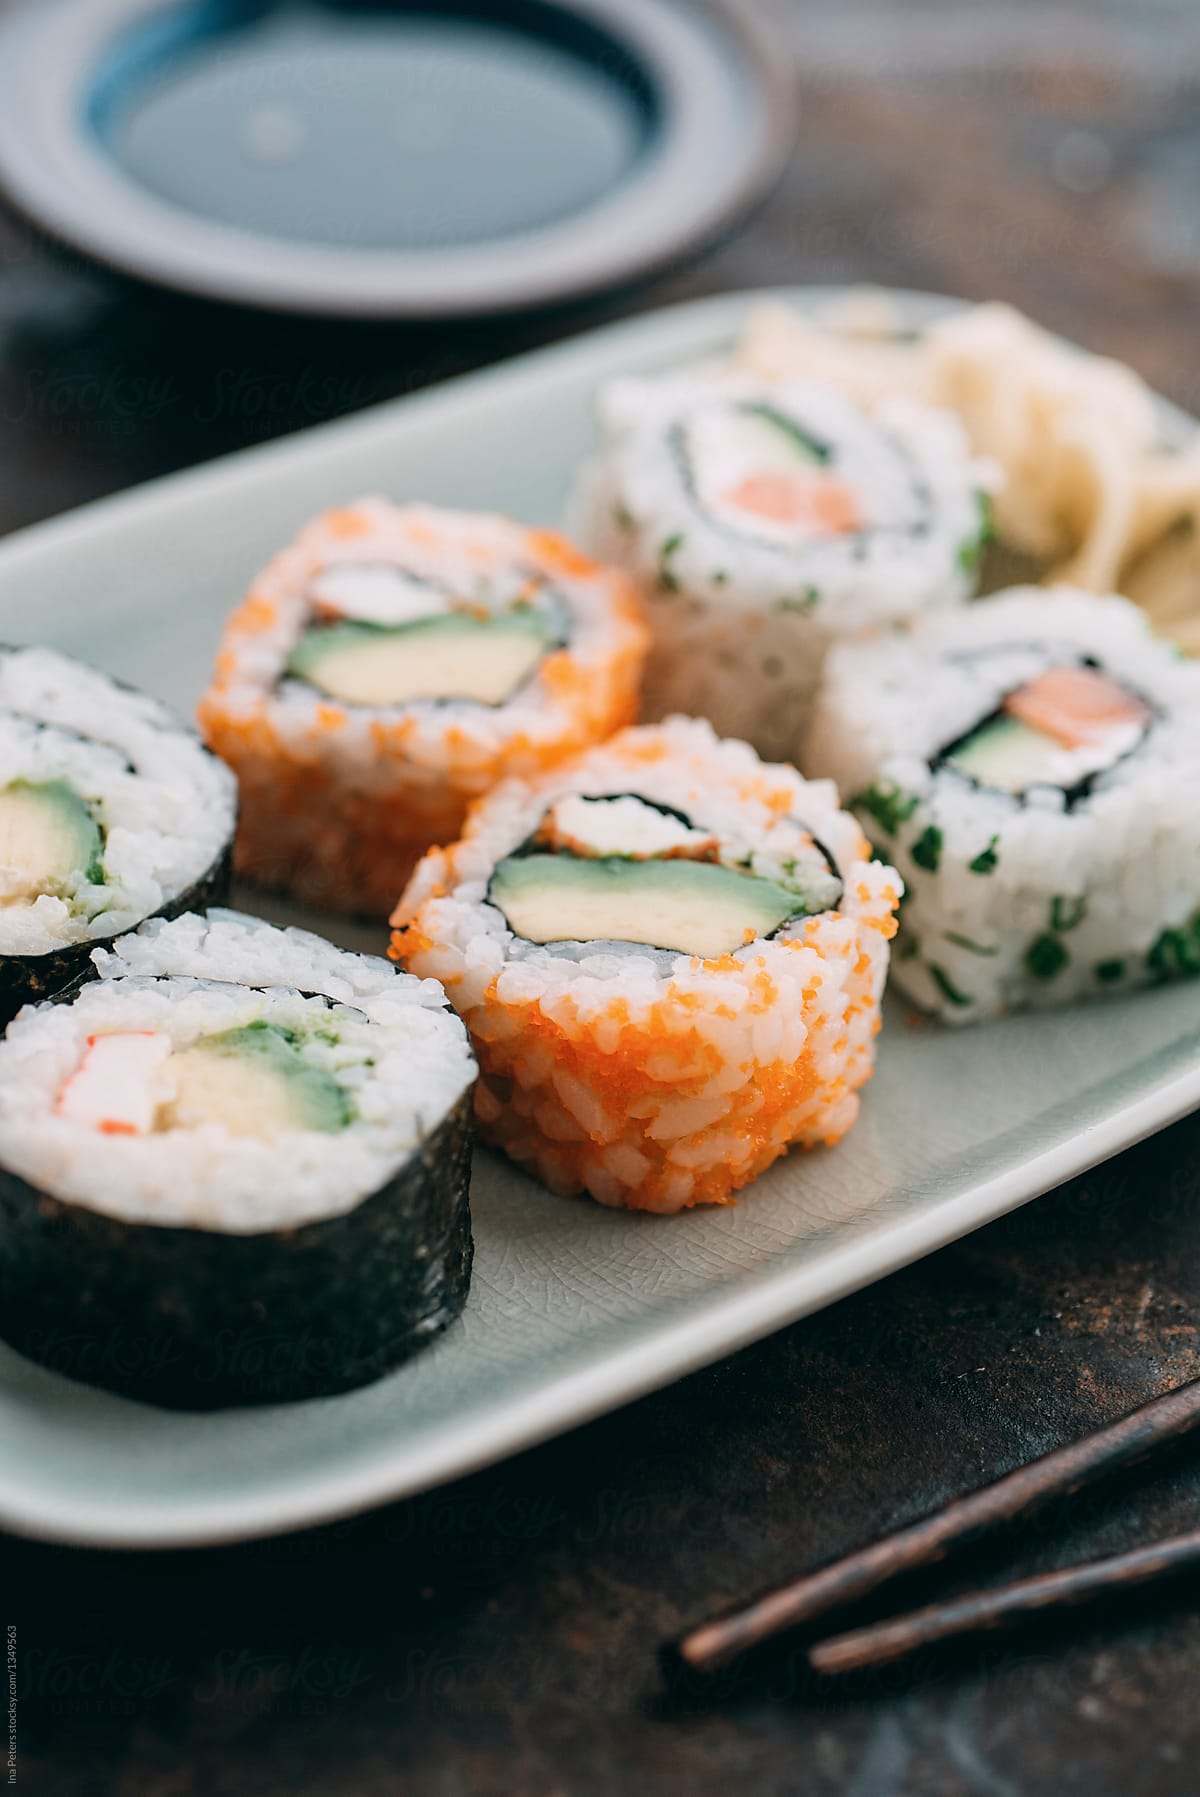 Food: Sushi rolls on a plate with ginger